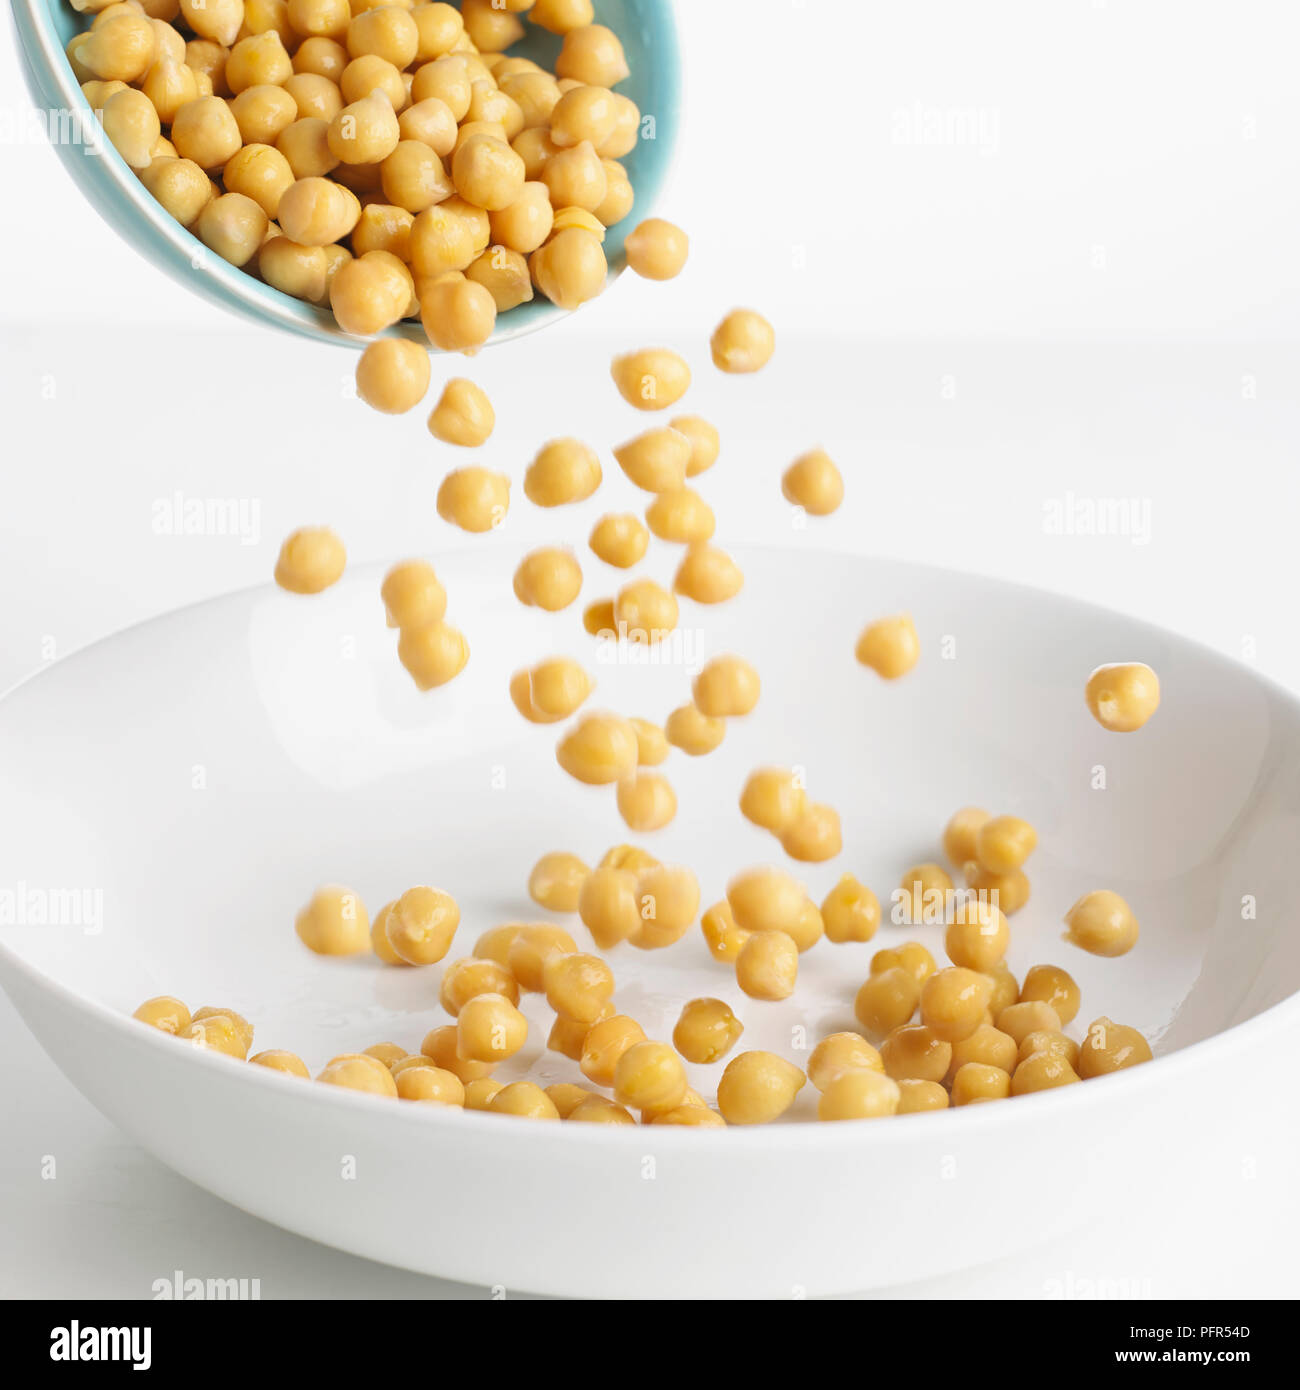 Pouring chickpeas into a bowl Stock Photo